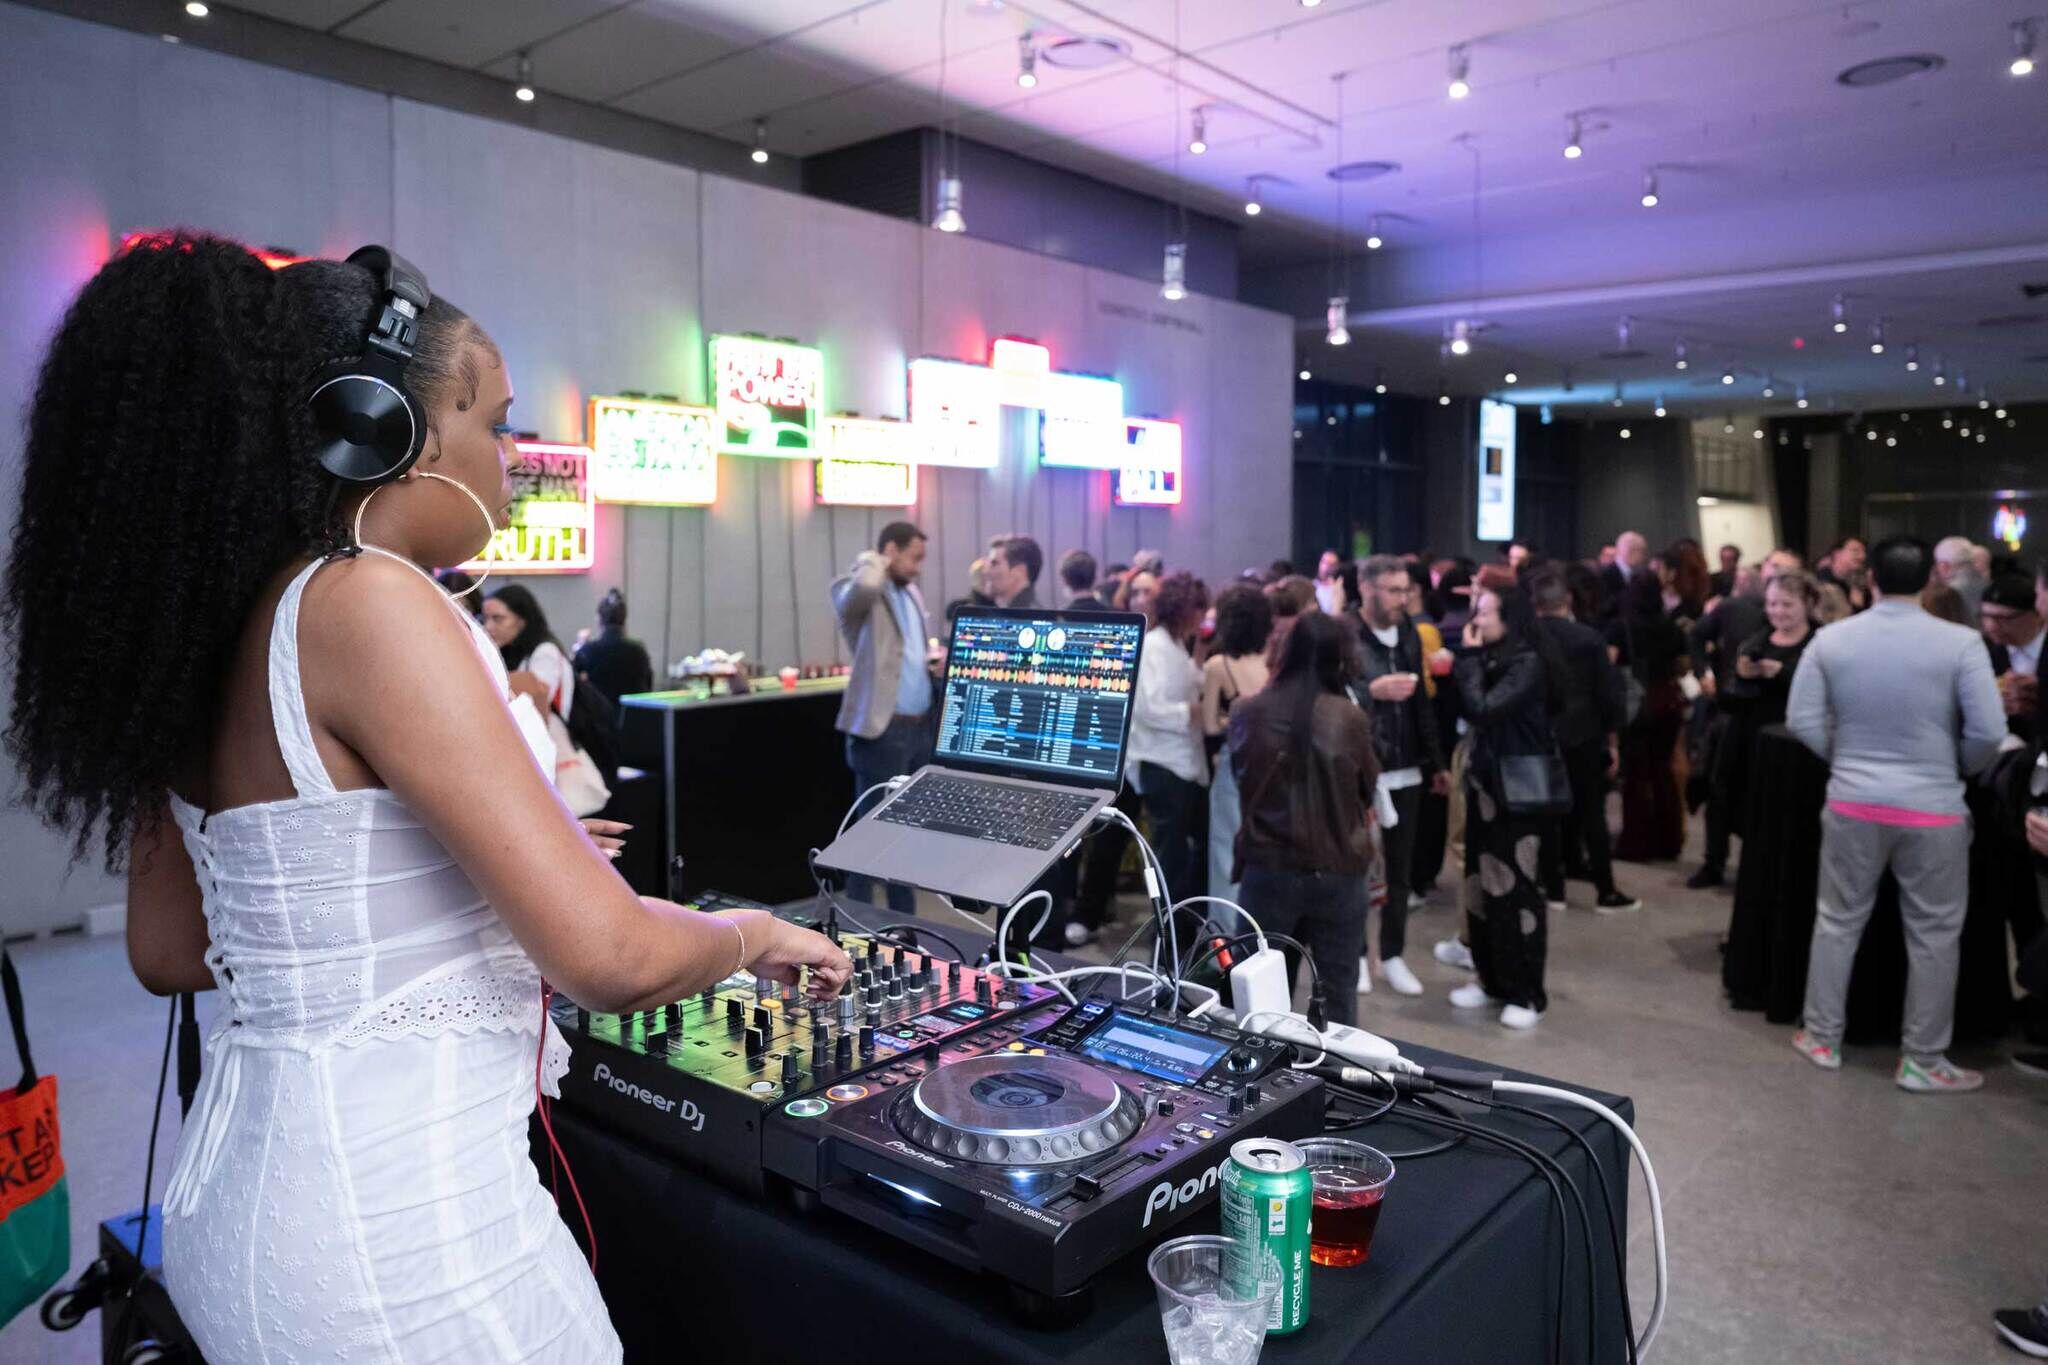 DJ Bembona playing a set in the Whitney Museum Lobby, with guests on the dance floor.
